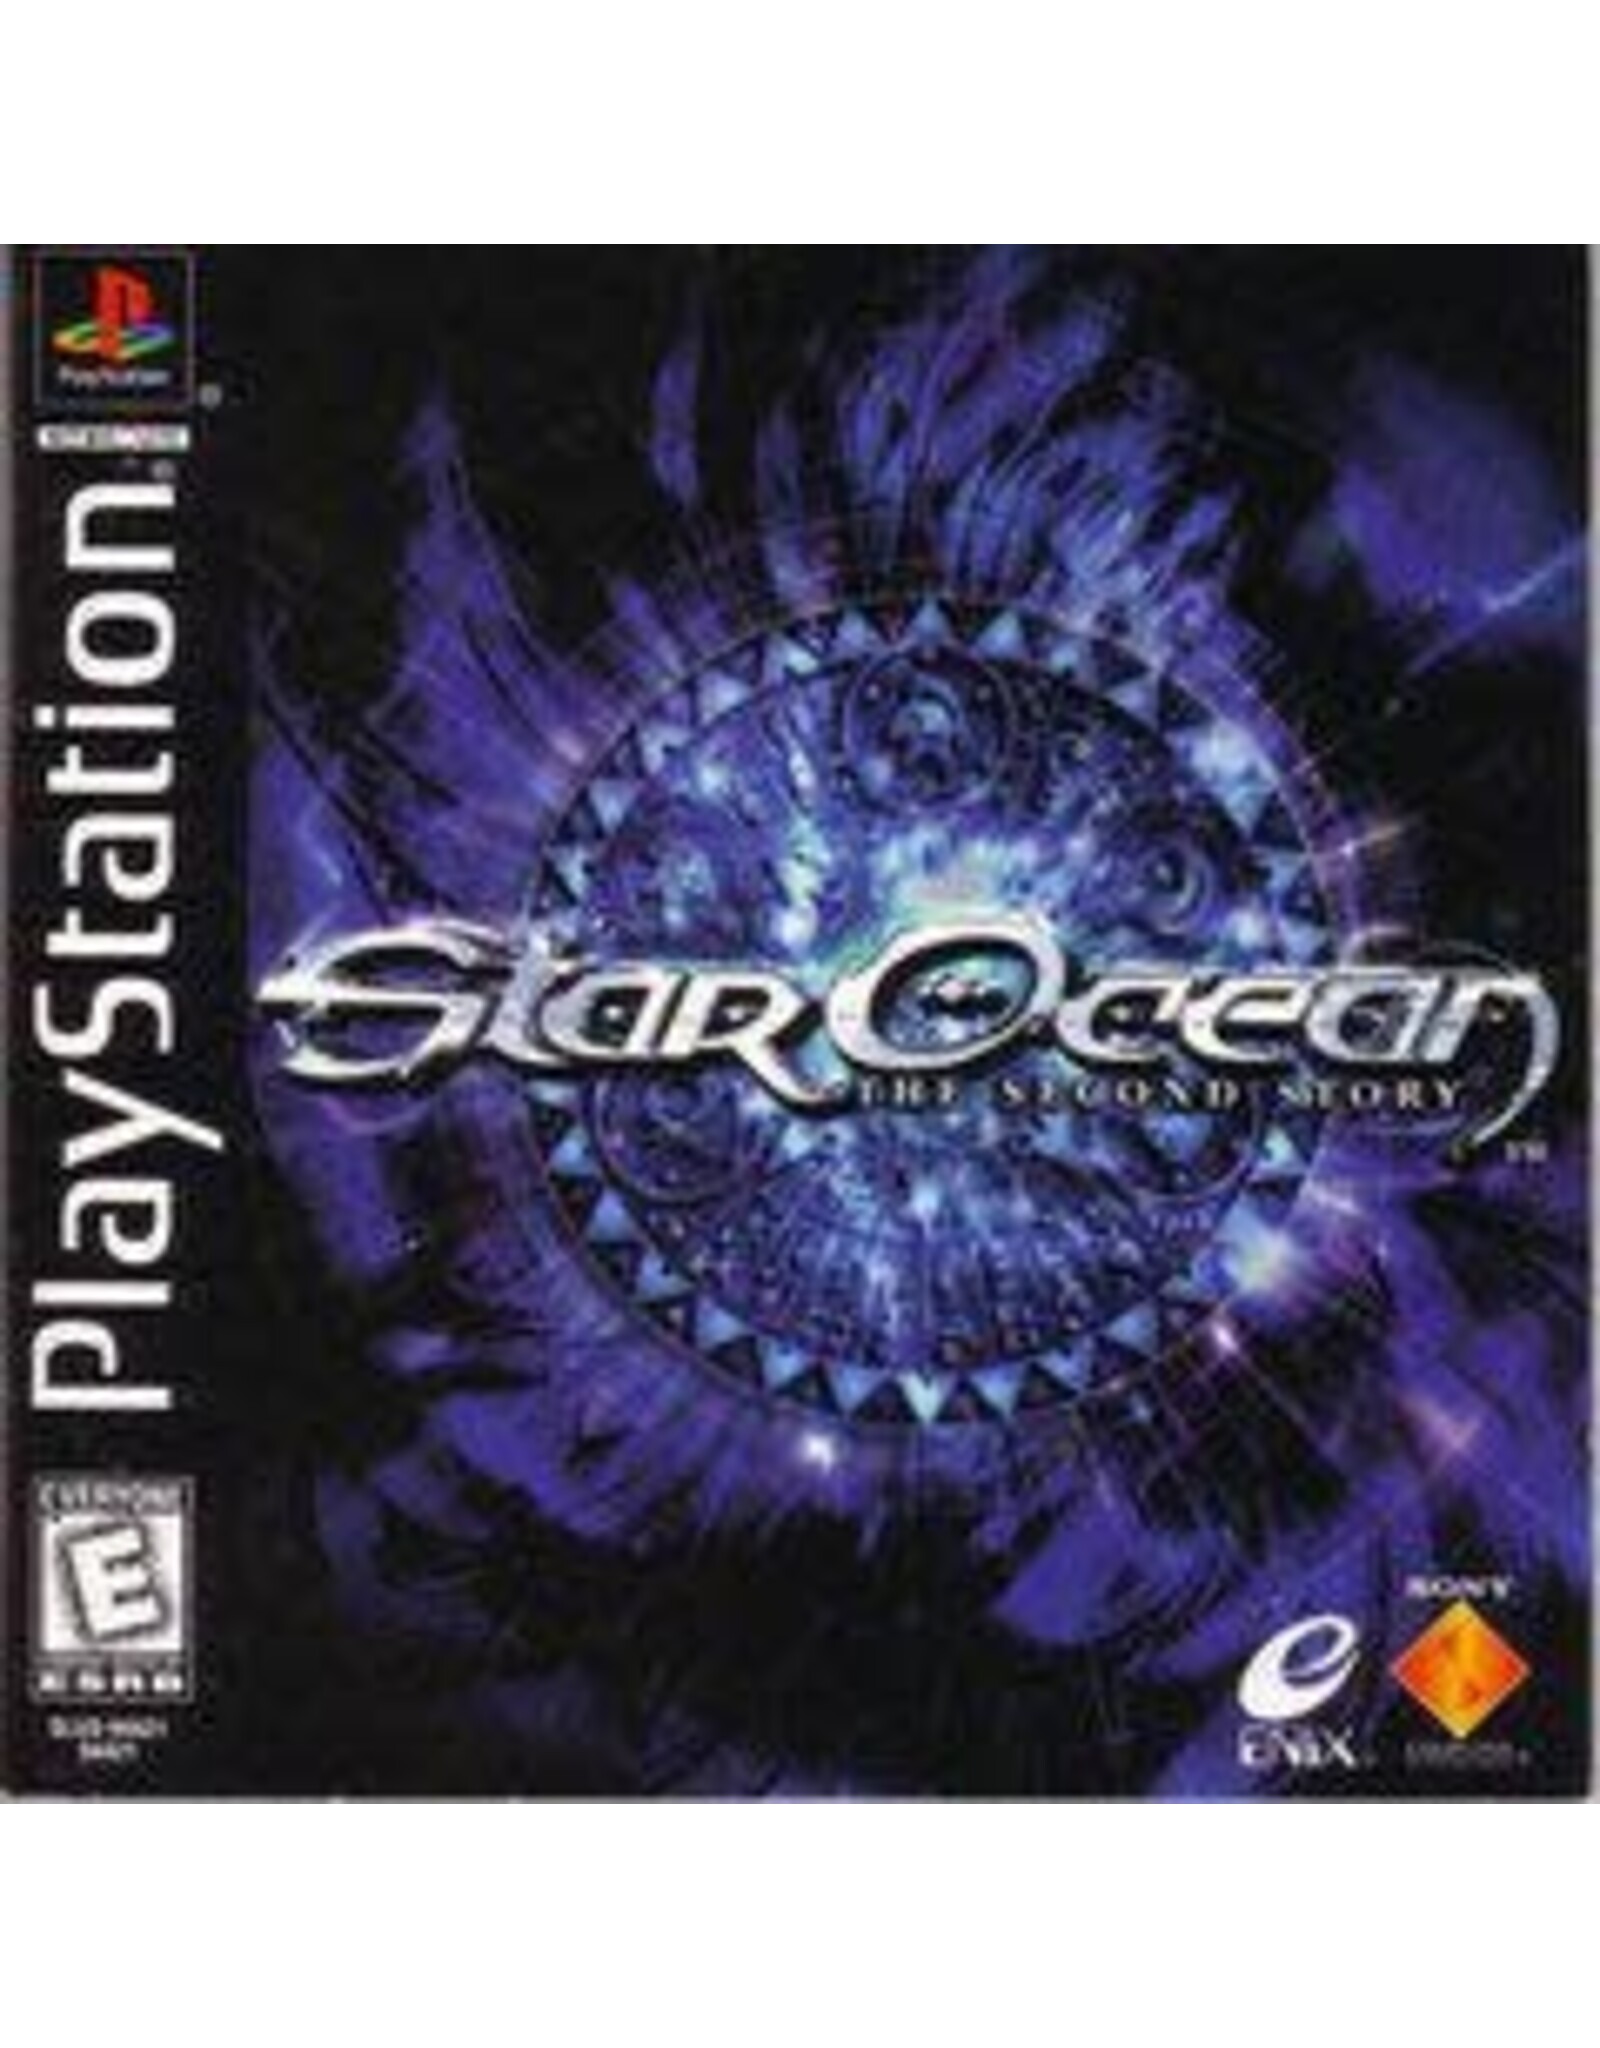 Playstation Star Ocean: The Second Story (No Manual)